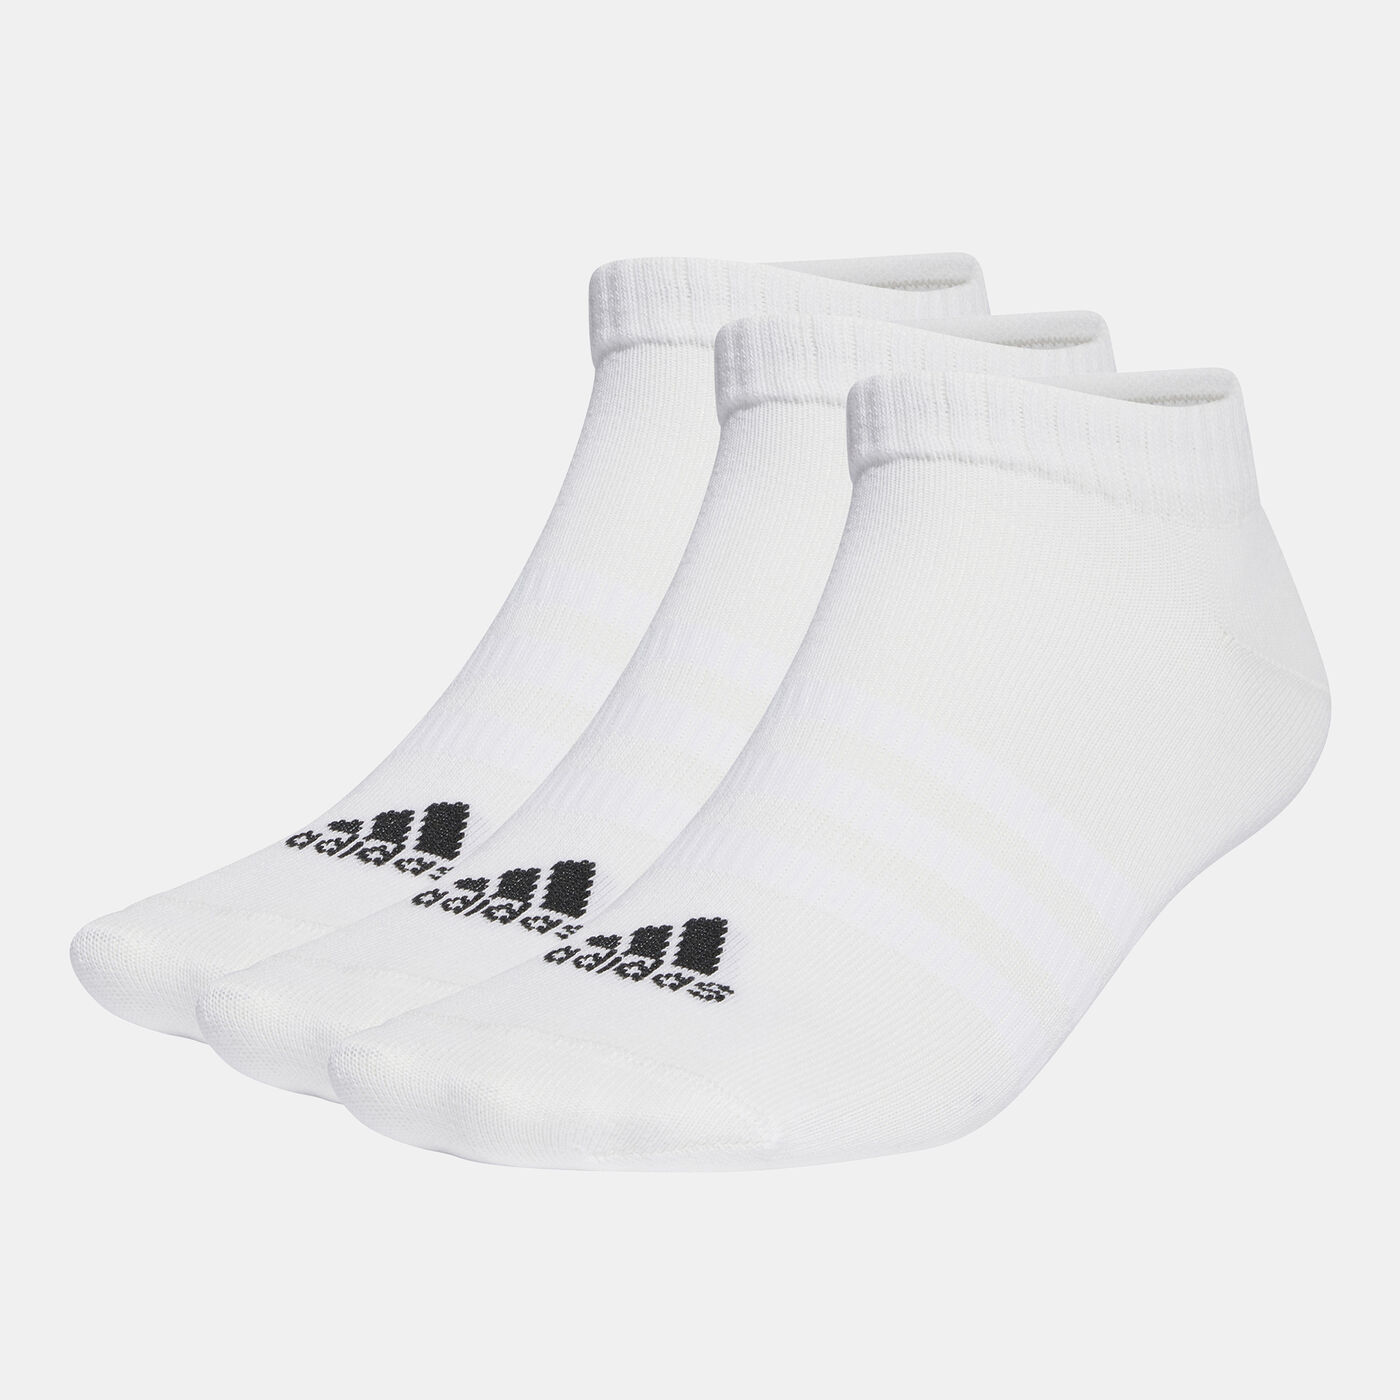 Men's Thin and Light Low-Cut Socks (3 Pack)